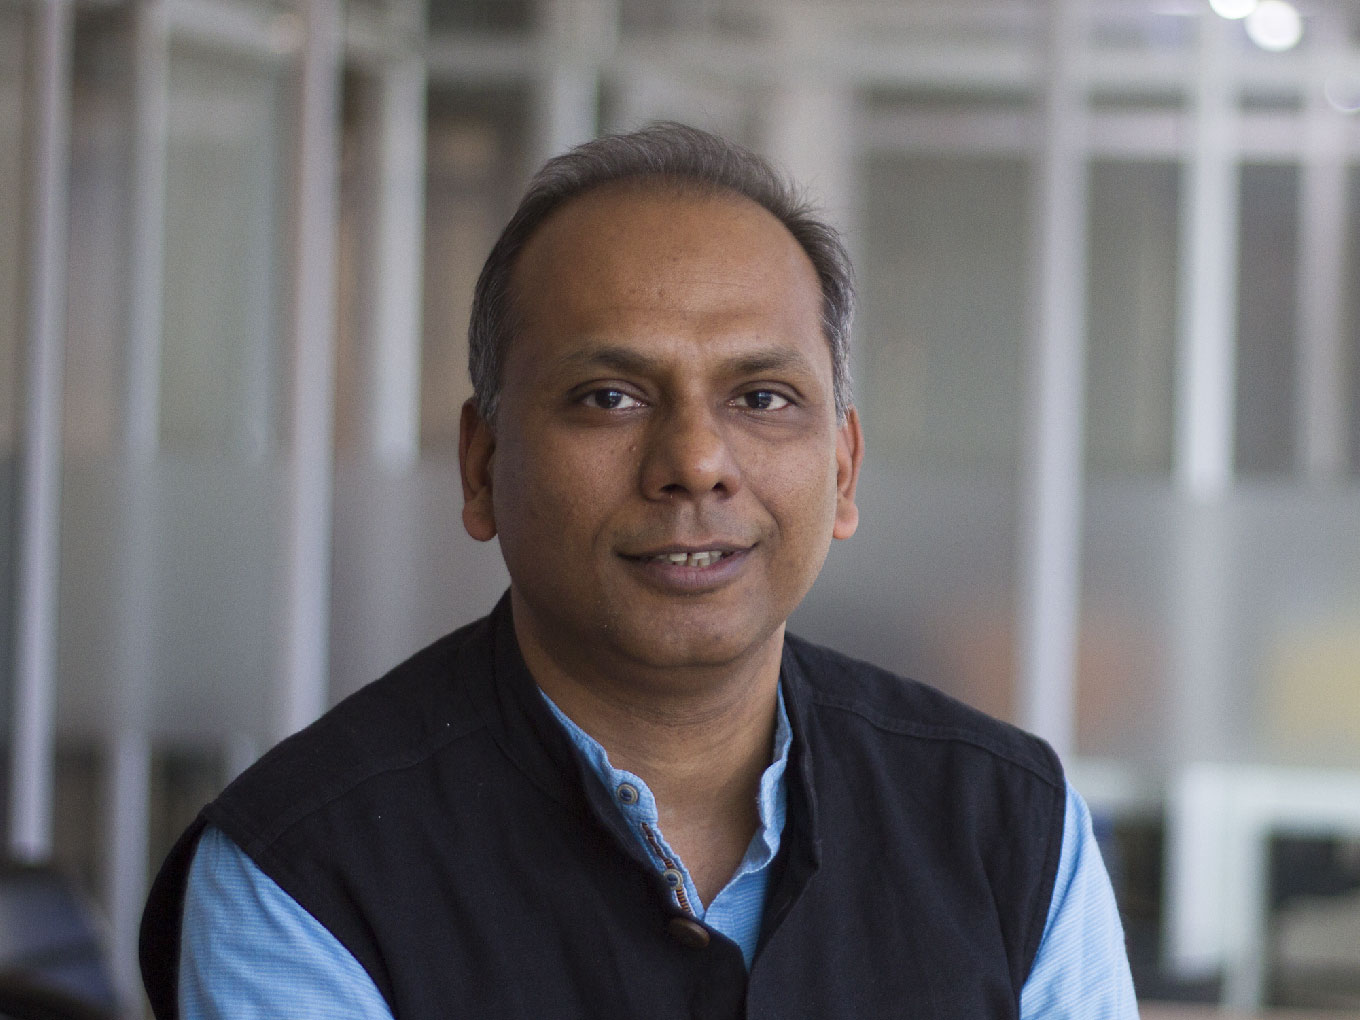 How Manish Singhal’s pi Ventures Is Helping Solve Big Problems In A Differentiated Way